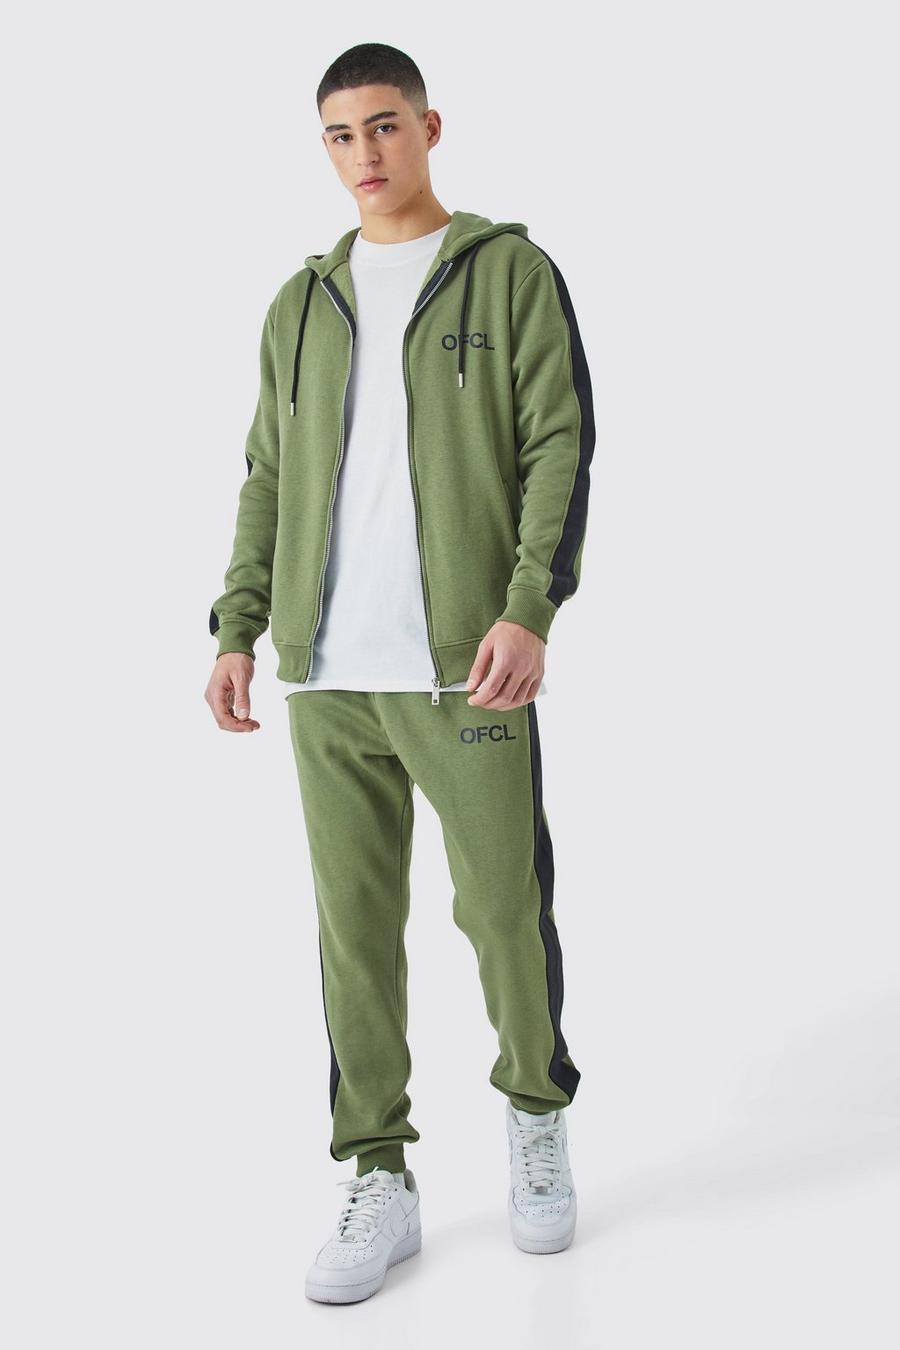 Olive Ofcl Slim Zip Through Contrast Colour Block Hooded Tracksuit